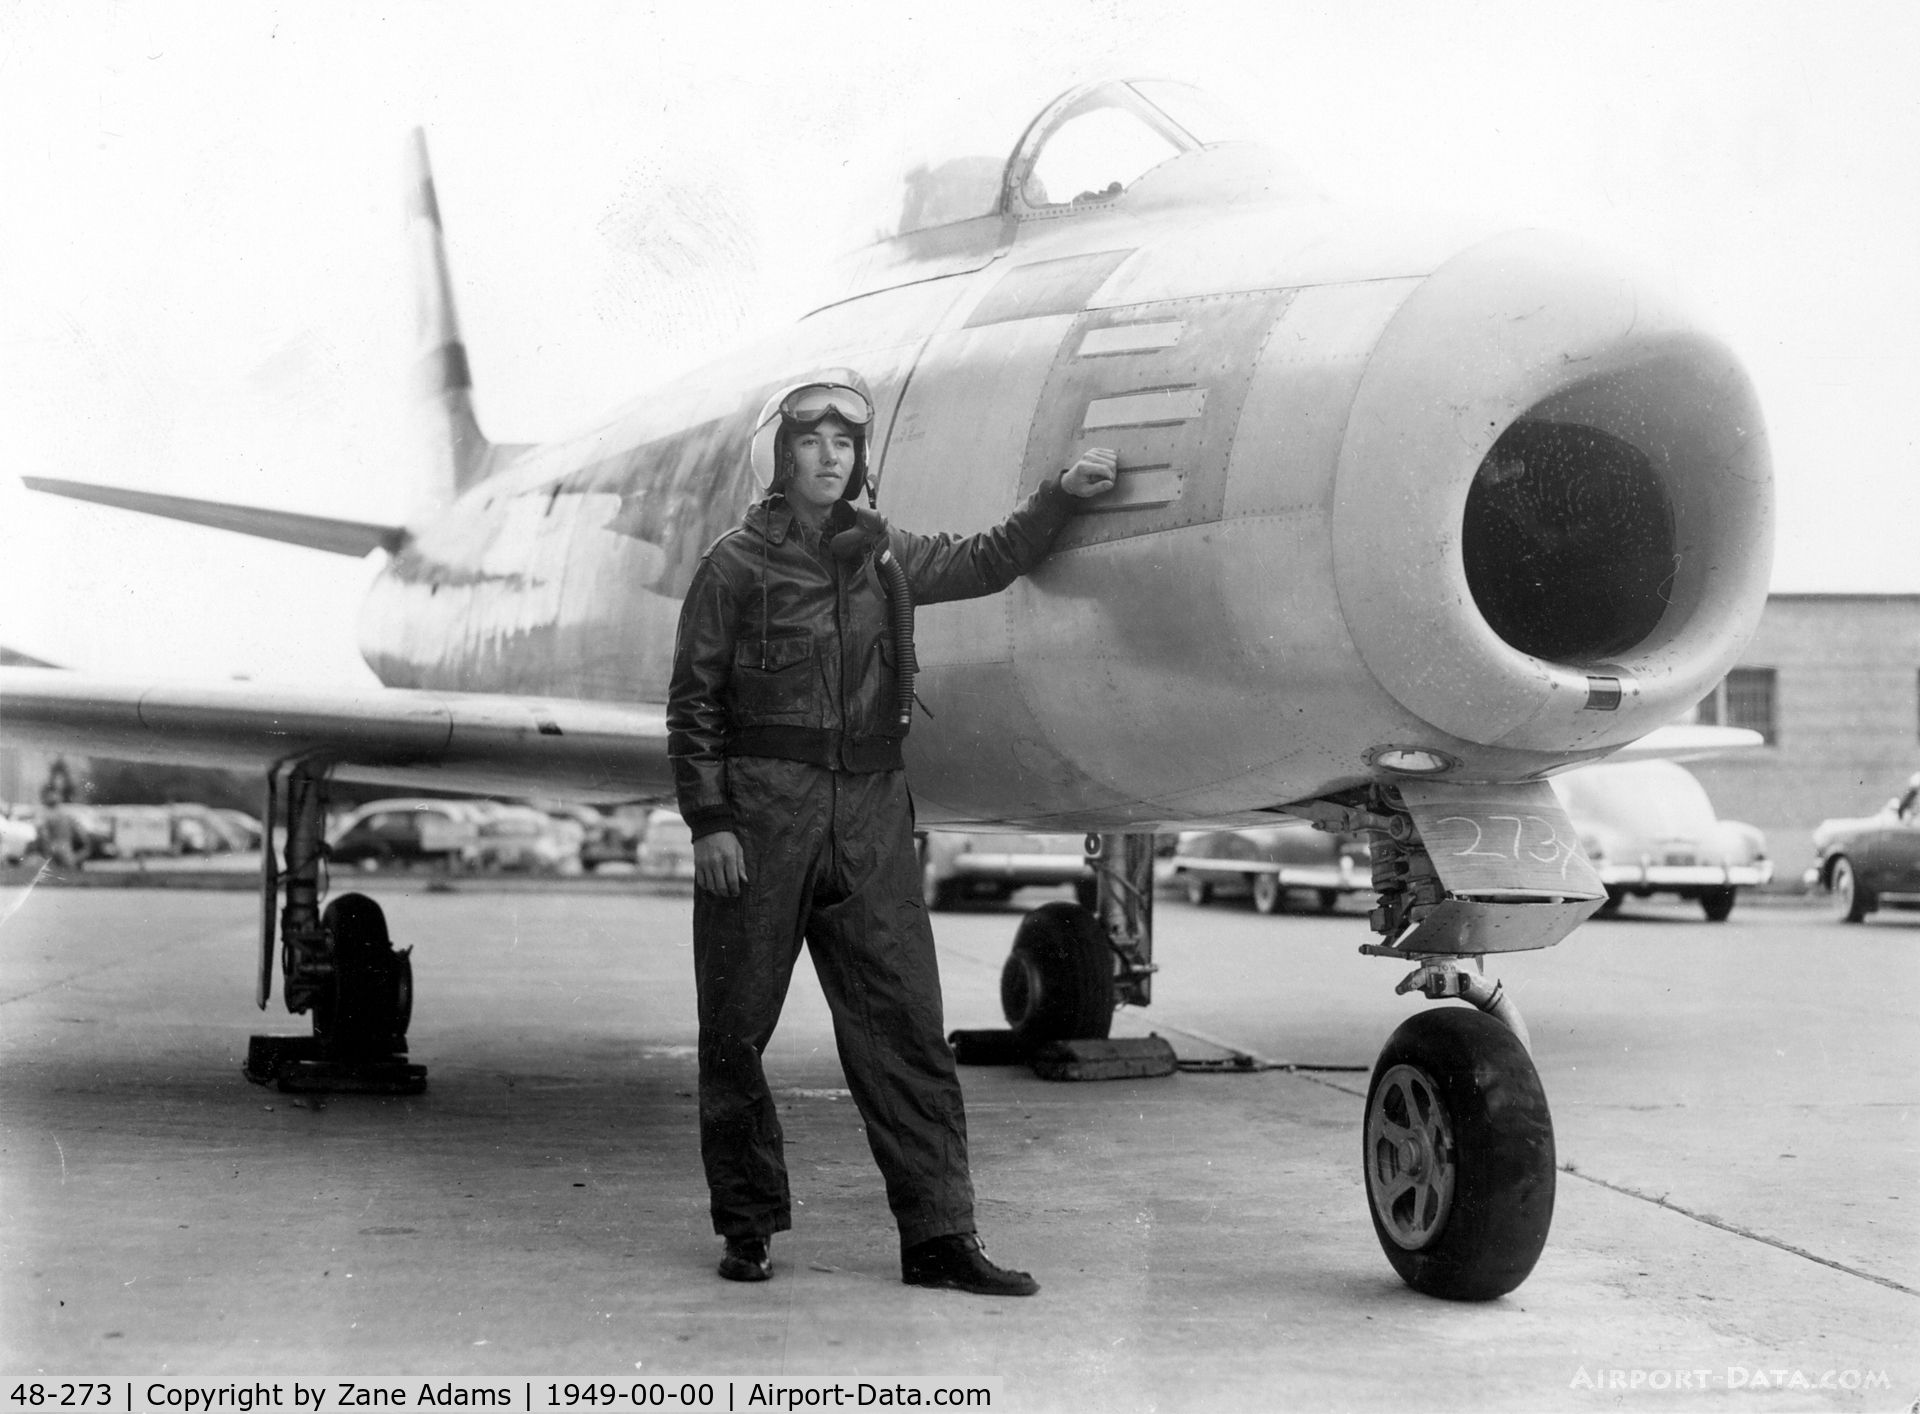 48-273, 1948 North American F-86A Sabre C/N 151-43642, Early F-86 (P-86) at the former Lowry AFB - Denver, CO. Airman John Van Dyke pictured.